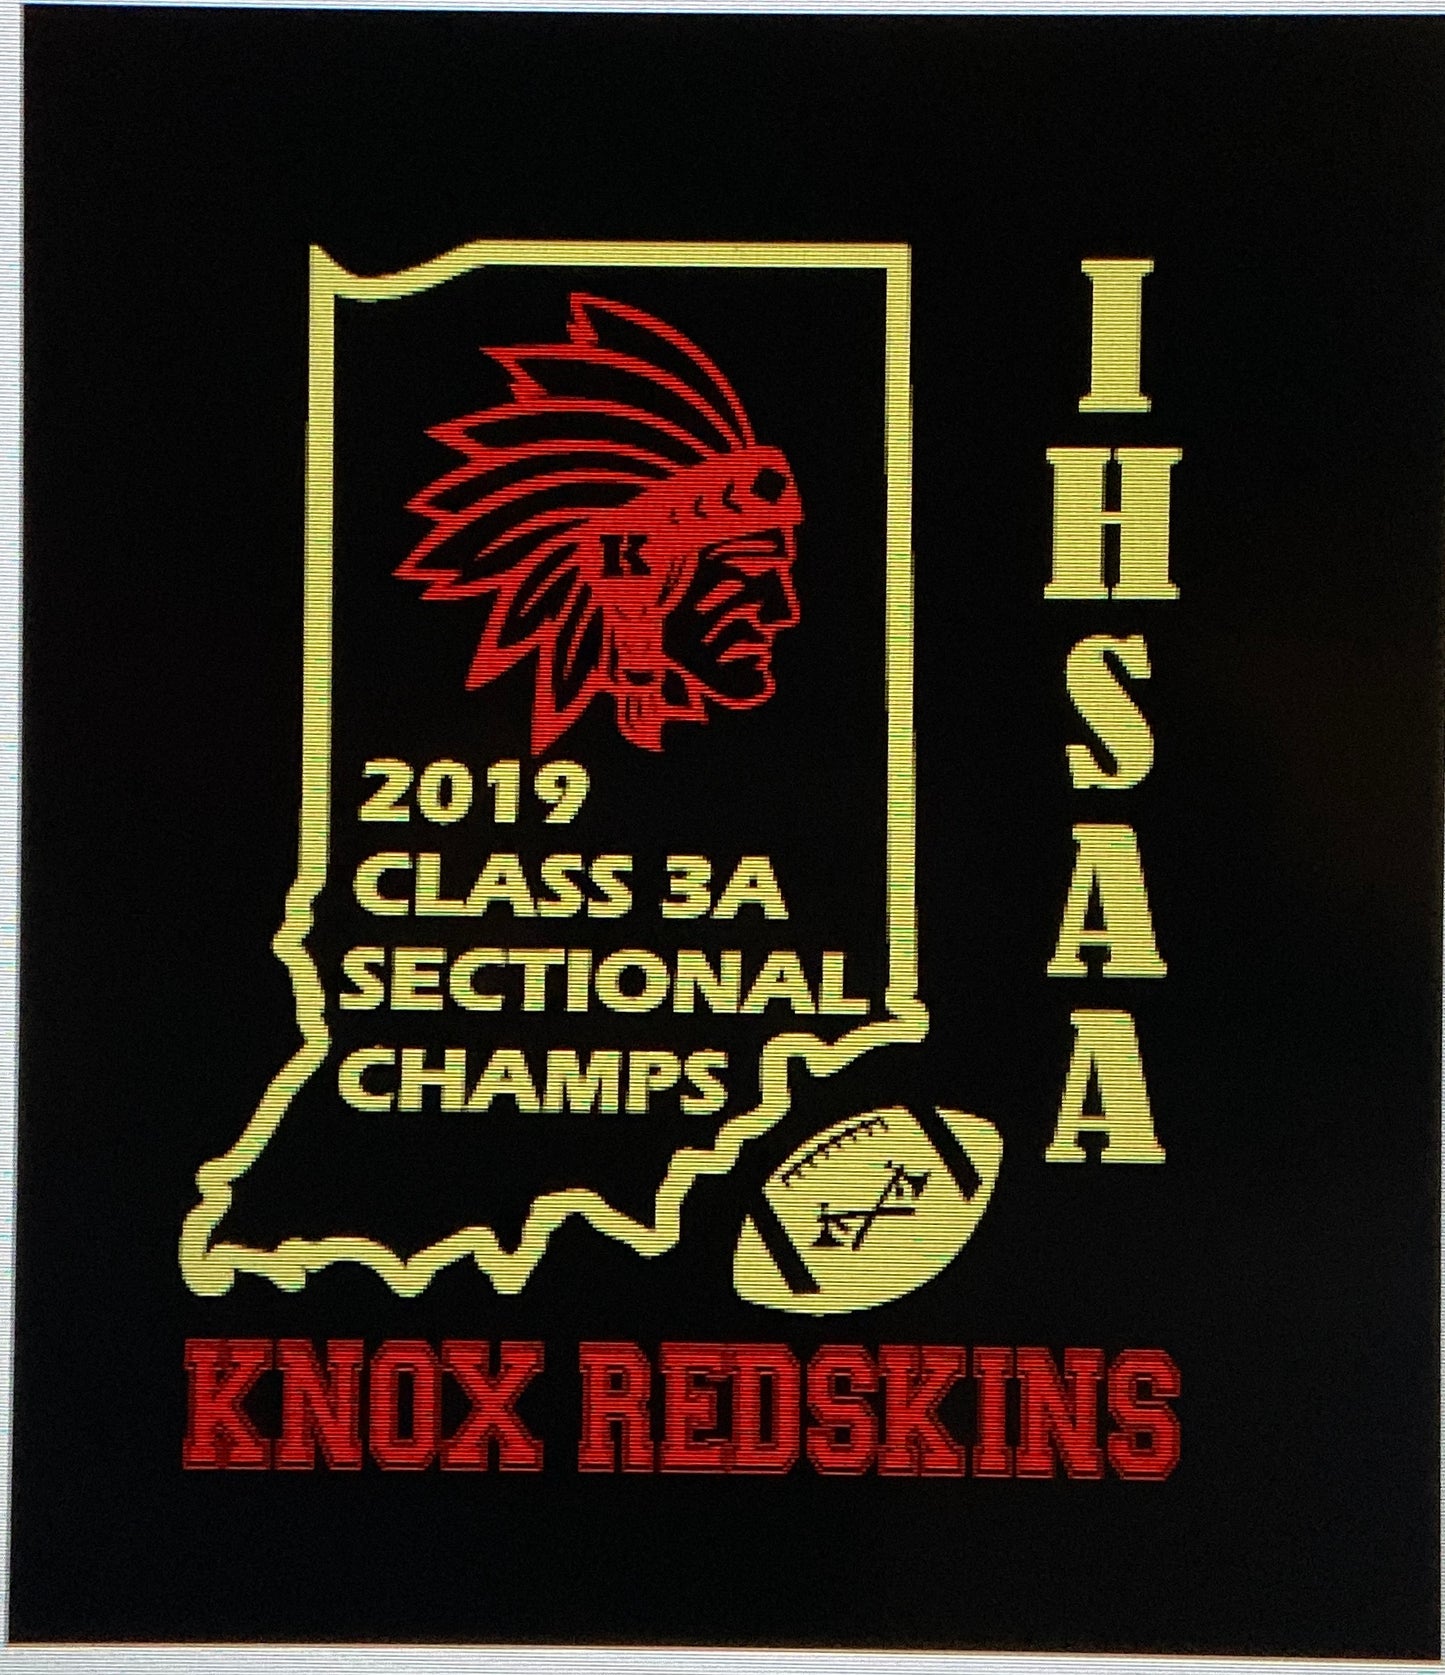 CLEARANCE - Knox Redskins Football 2019 3A Sectional Champions Shirt First in School History